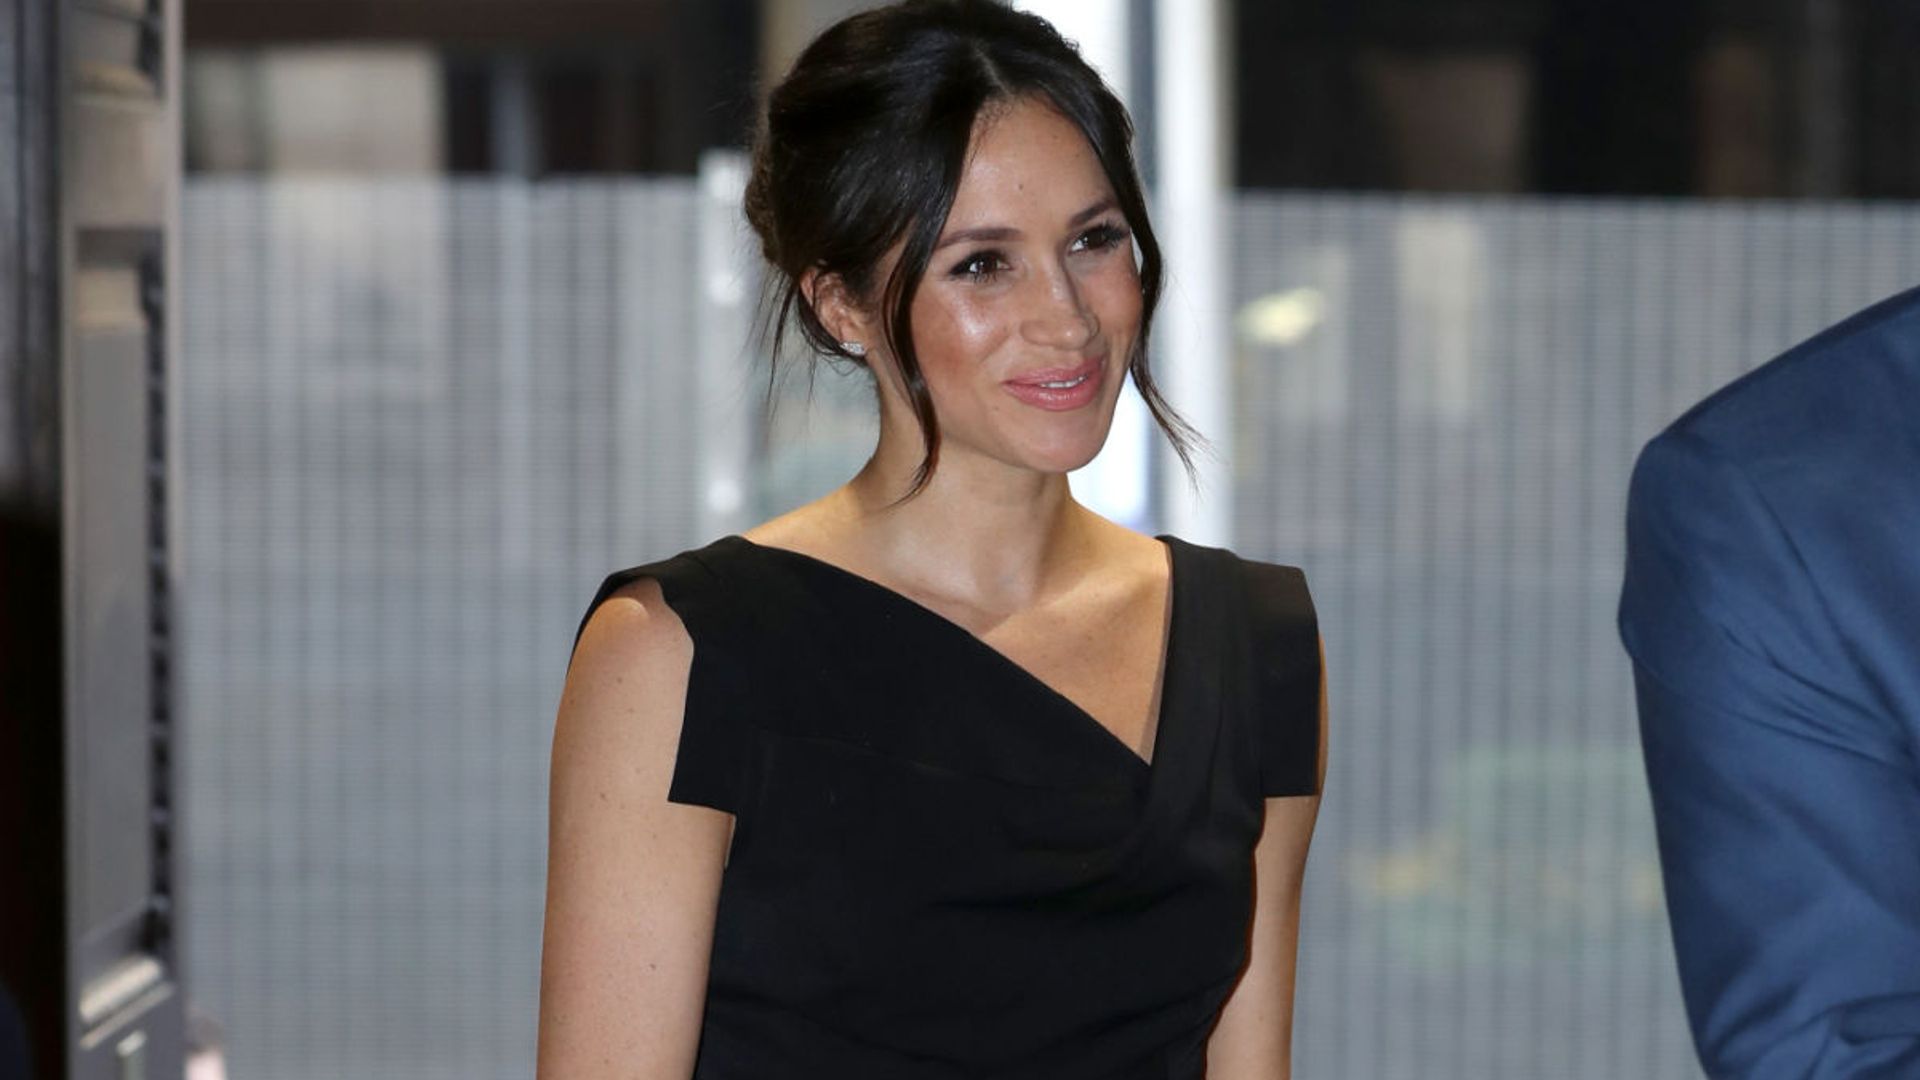 Remember Meghan Markle's super glam LBD? Well, River Island has nailed ...